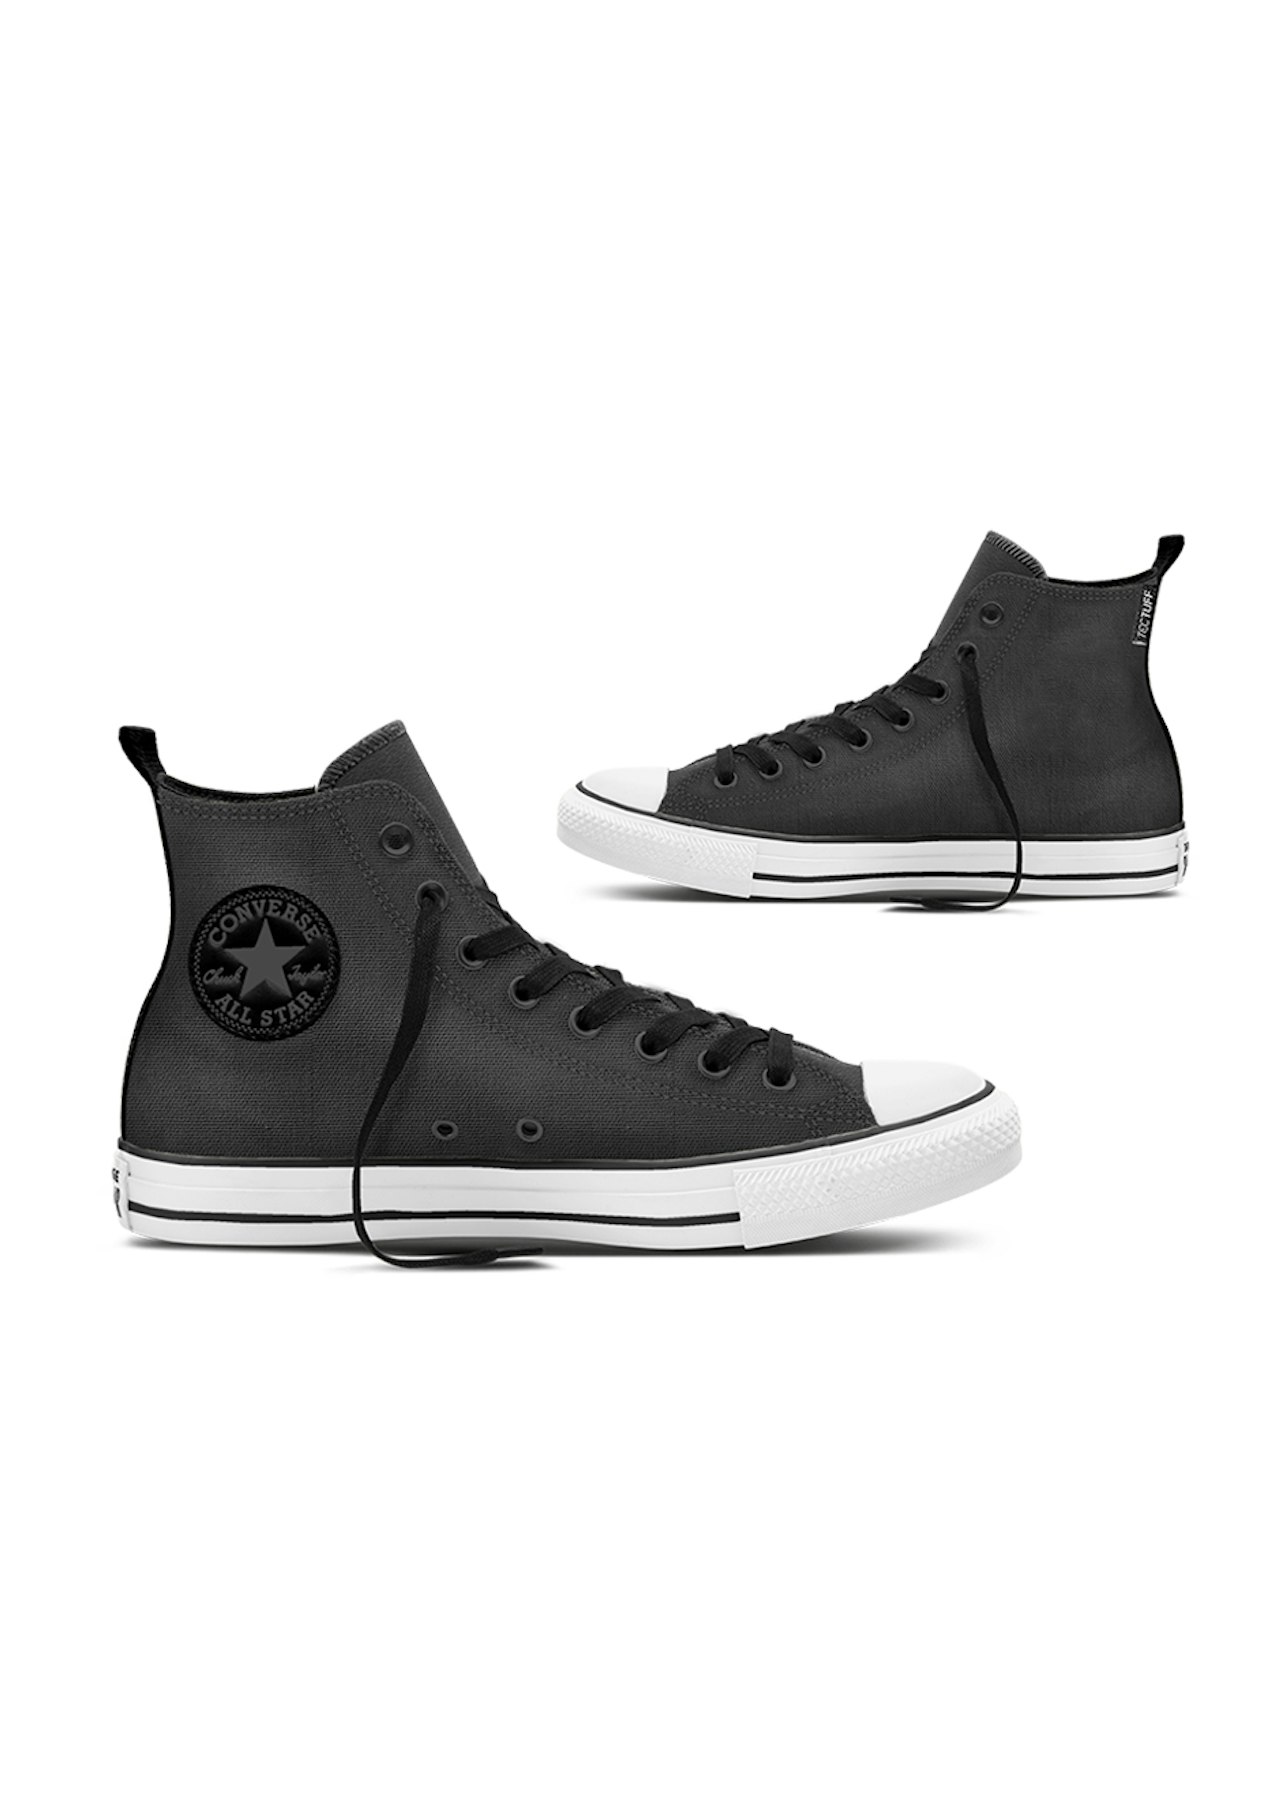 Converse - Unisex - Chuck Taylor All Star Ct Engineered Optimism Hi -  Almost Black/White/Black - Onceit